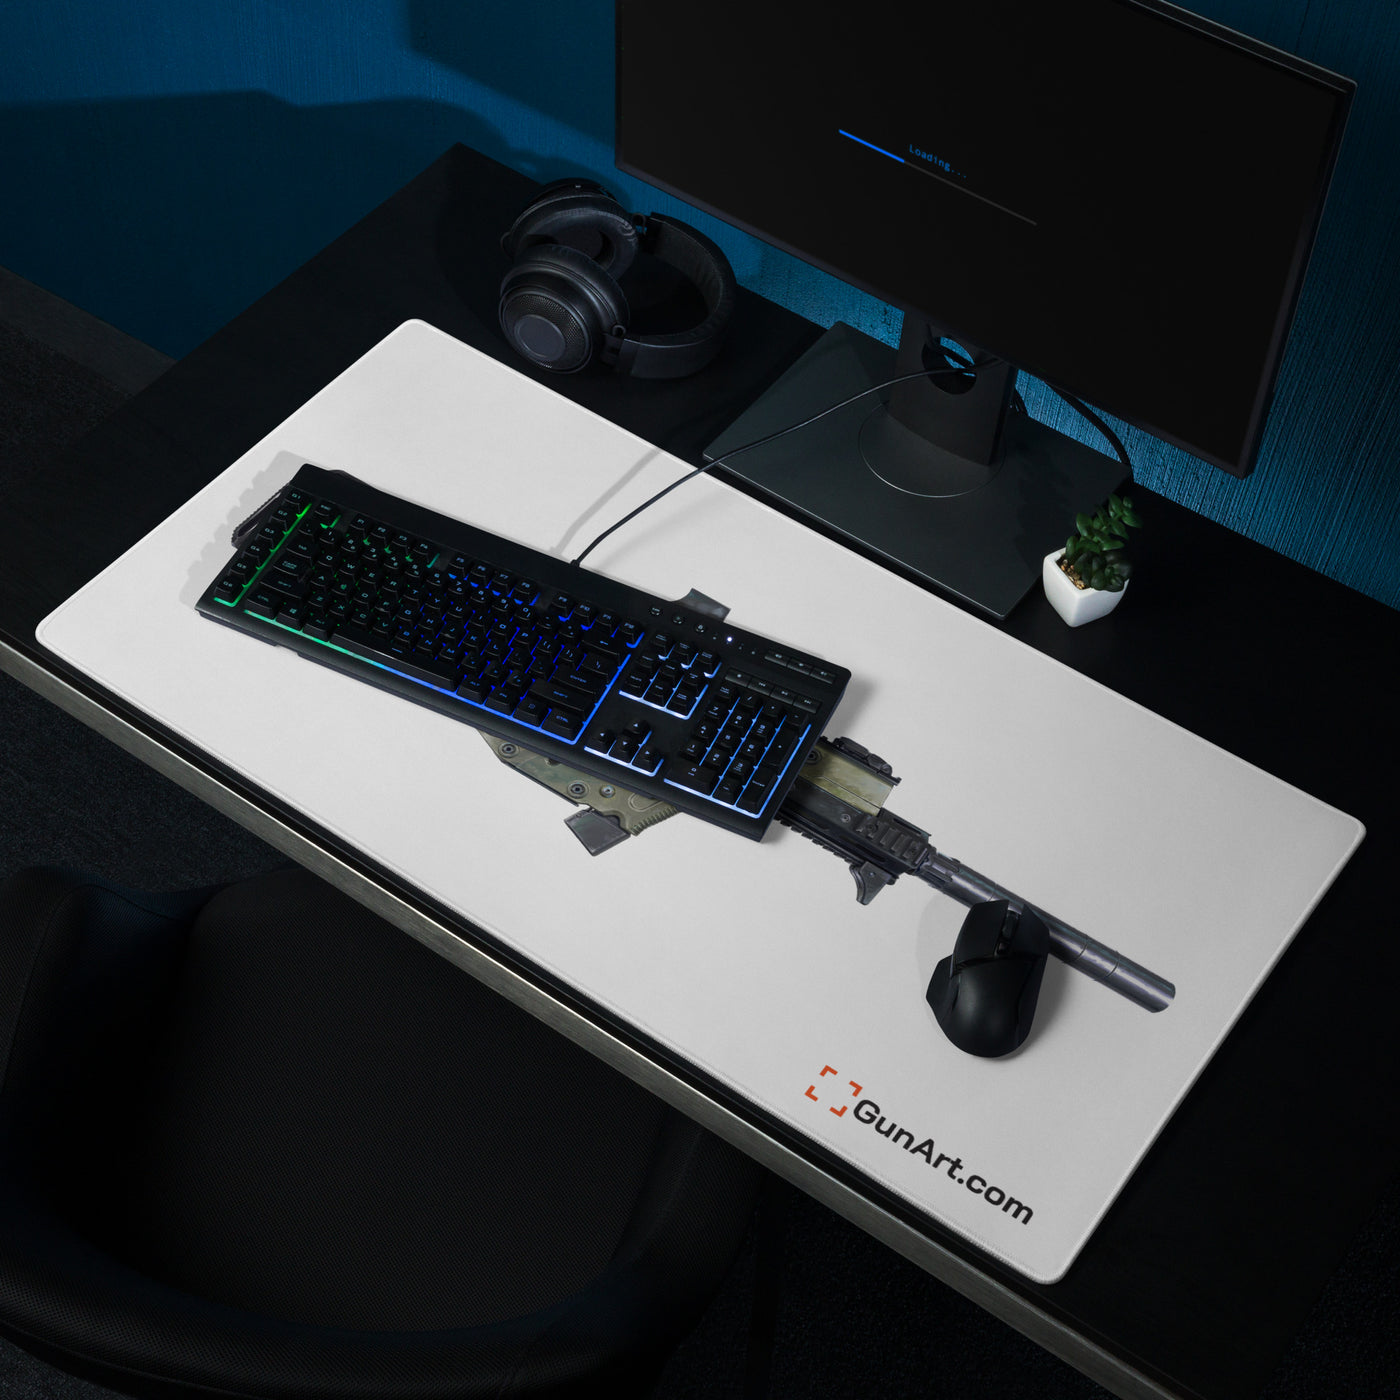 The Vindicator - Suppressed SMG Gaming Mouse Pad - Just The Piece - White Background